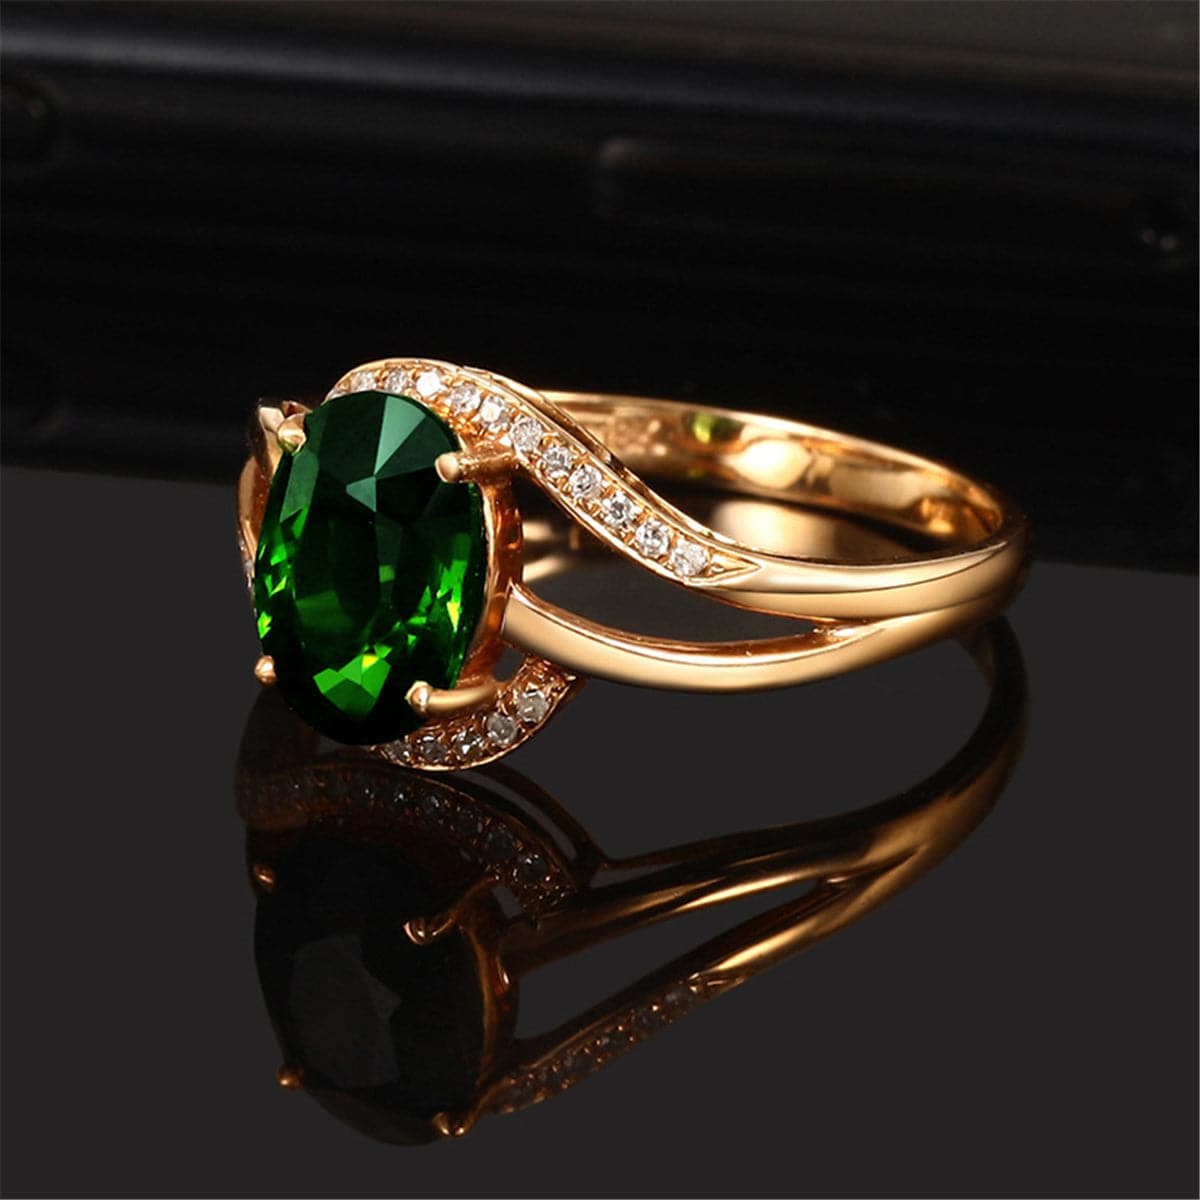 Emerald Crystal & Cubic Zirconia 18K Rose Gold-Plated Oval Ring